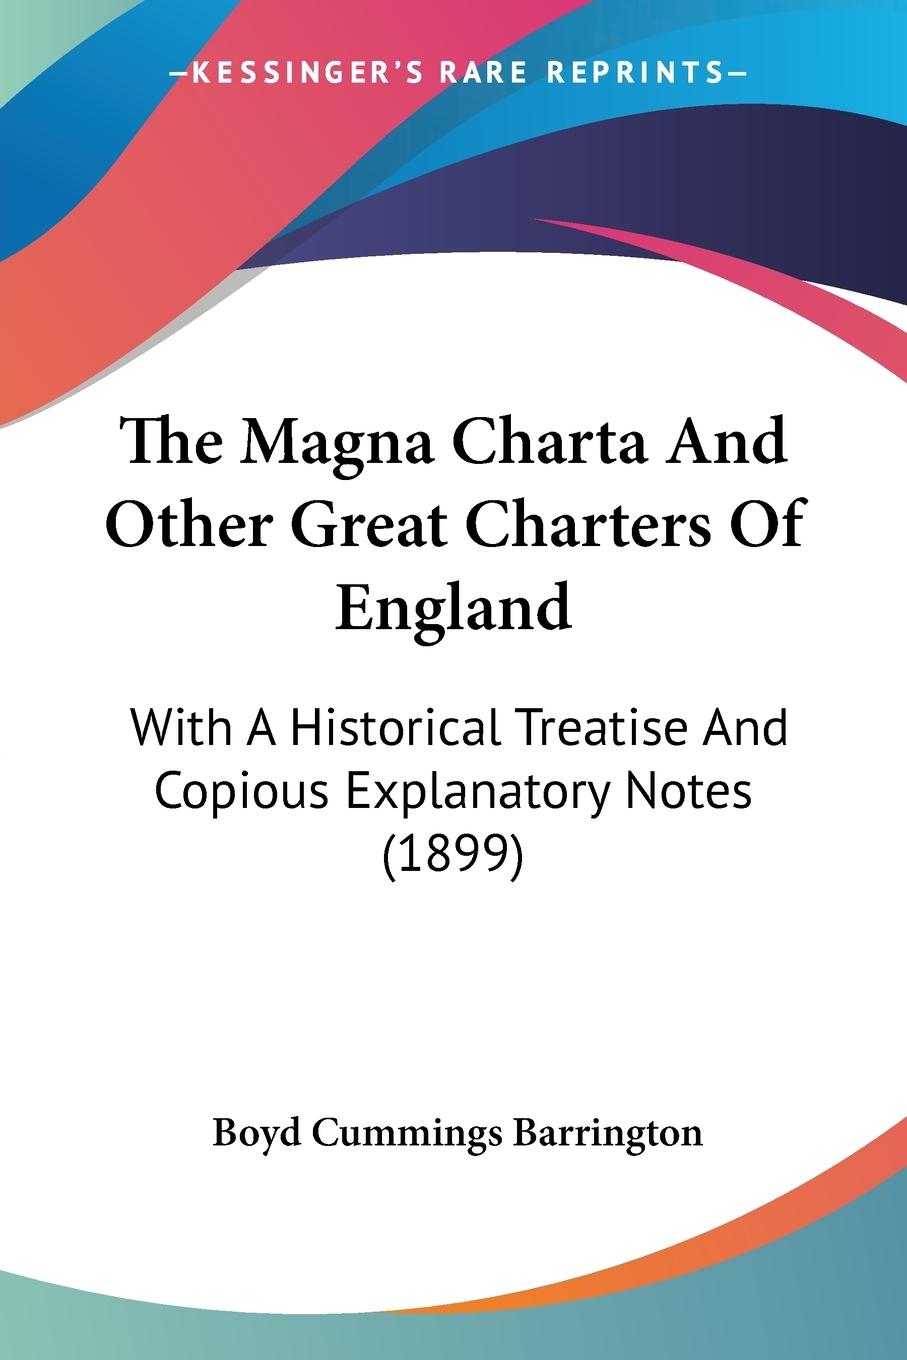 The Magna Charta And Other Great Charters Of England - Barrington, Boyd Cummings